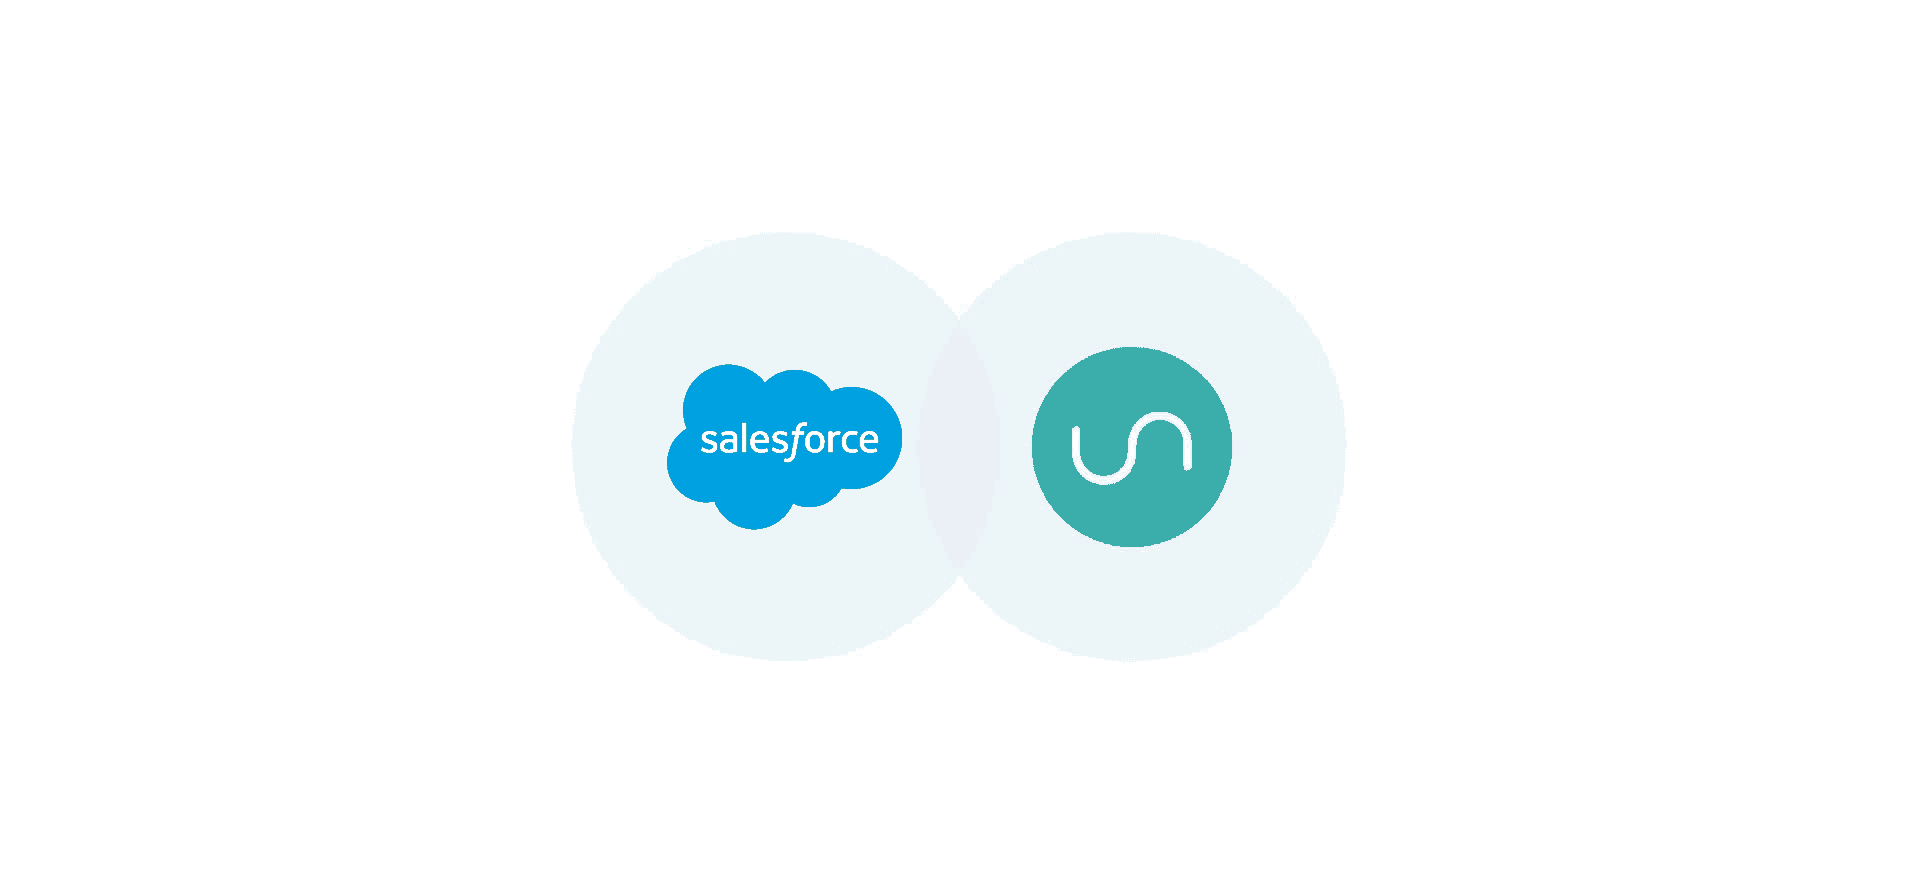 Logos for salesforce and unito, representing Unito's integration for Salesforce contacts